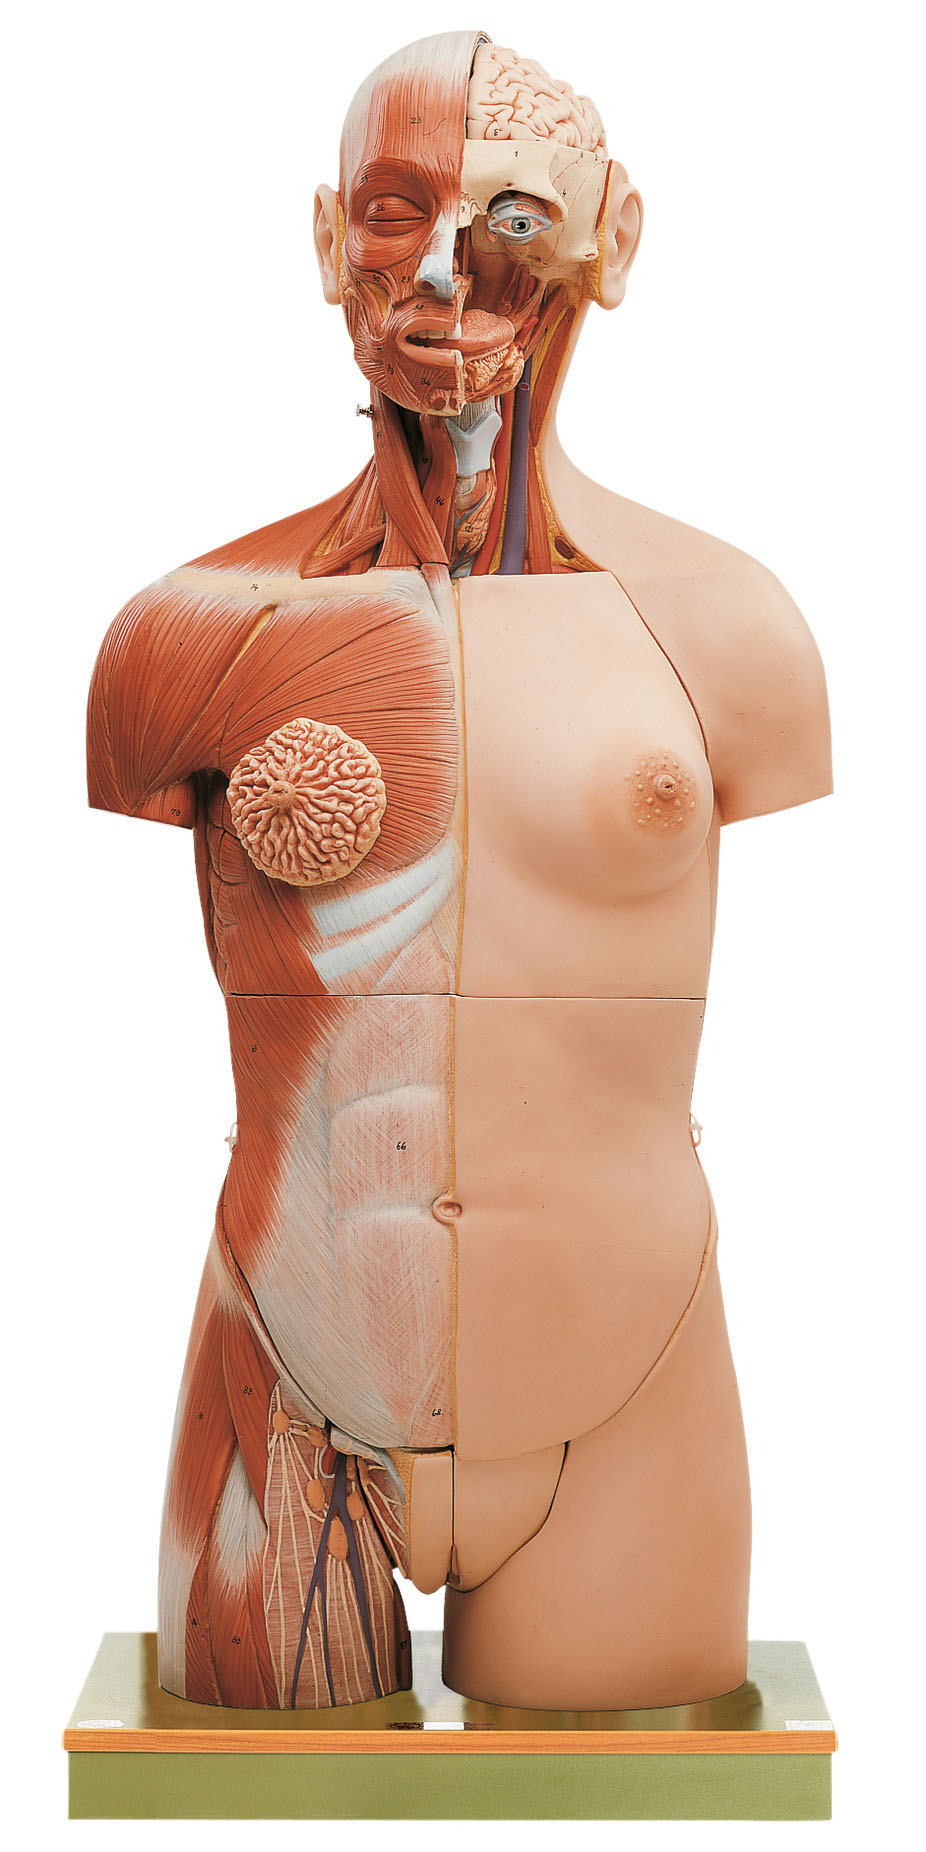 Muscle Torso With Head, Open Back and Interchangeable Male and Female Genitalia, Light